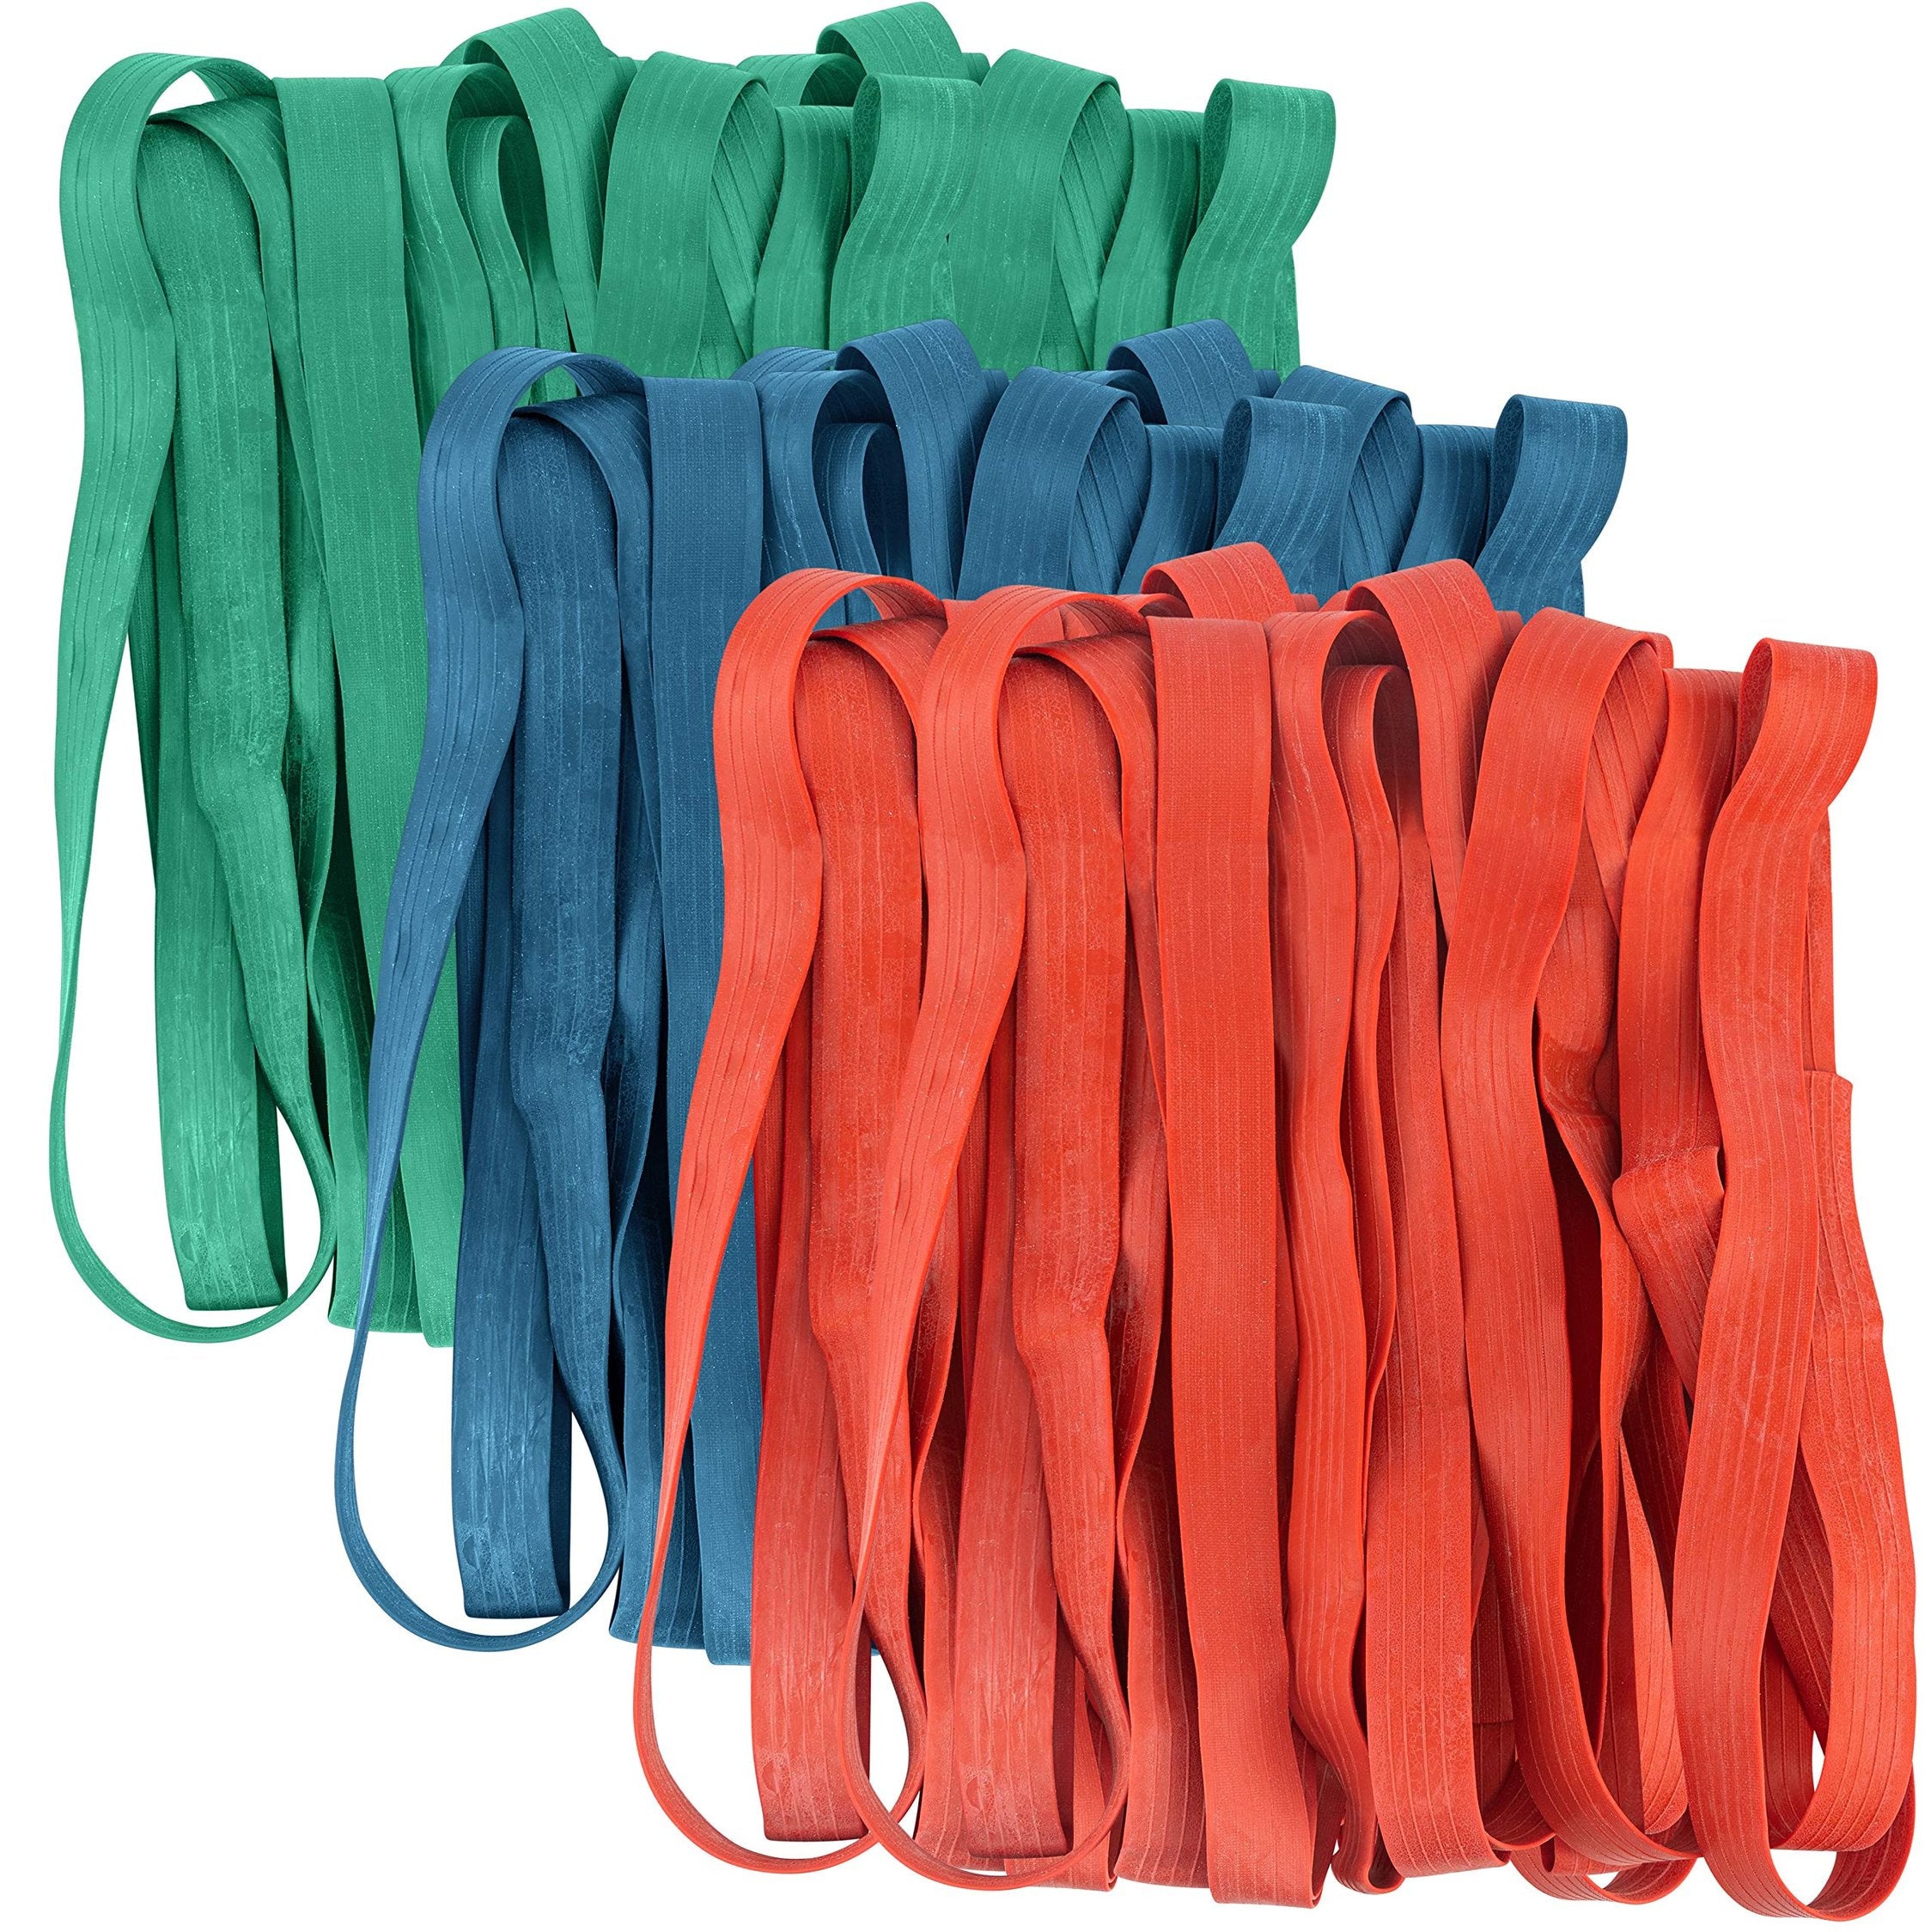 36 Pack Mover Blanket Rubber Bands - Extra Large Rubber Bands for Moving Blankets and Furniture - Variety of Sizes 26in, 30in & 42in - 36 Moving Bands Total - kitchentoolz